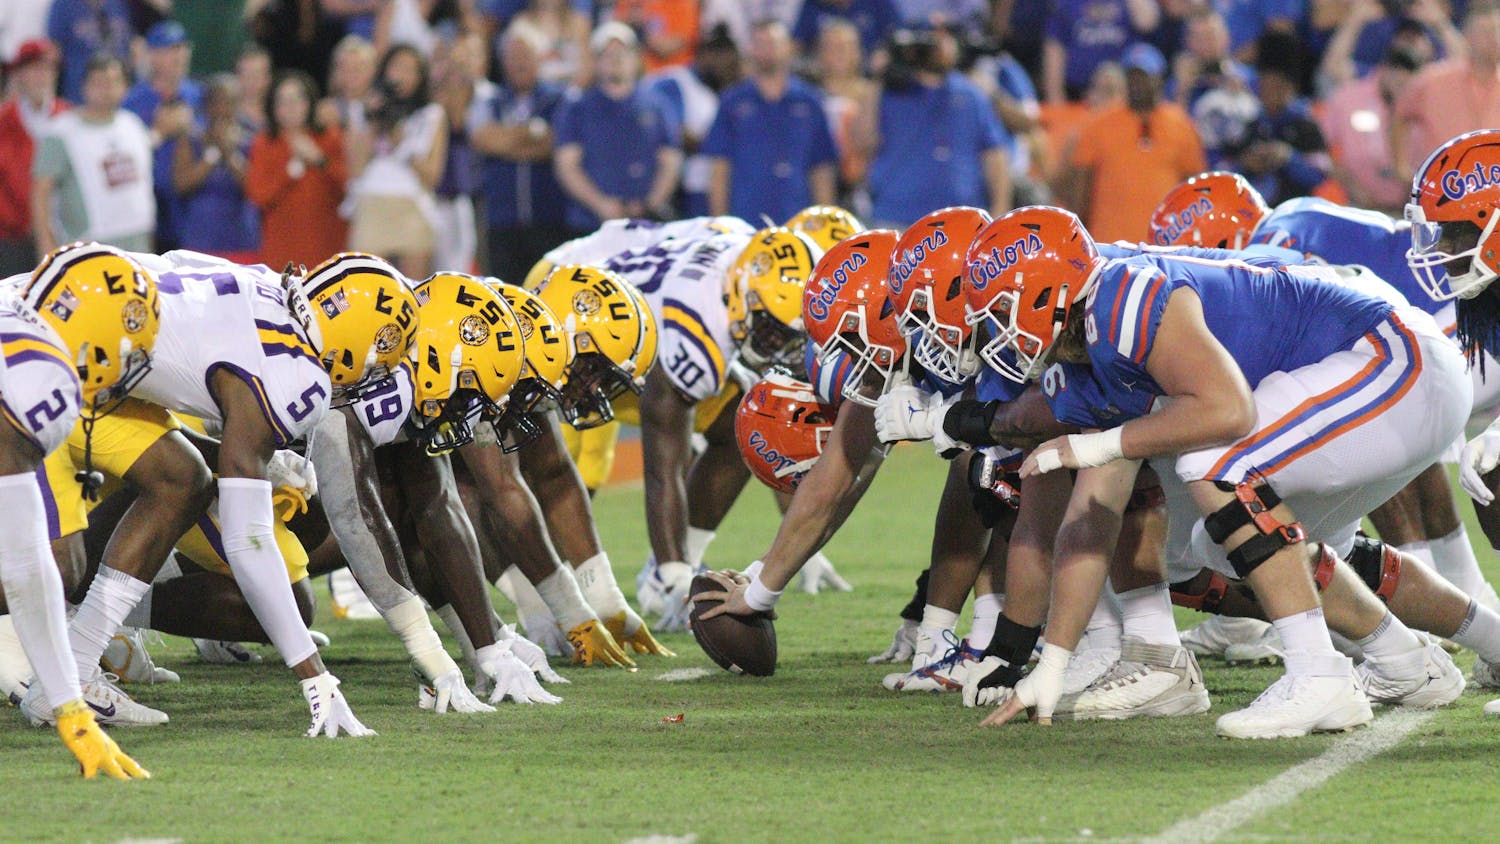 The Florida Gators' offensive line gets set against the LSU Tigers' defensive line in the Gators' 45-35 loss to the Tigers on Saturday, Oct. 15, 2022.